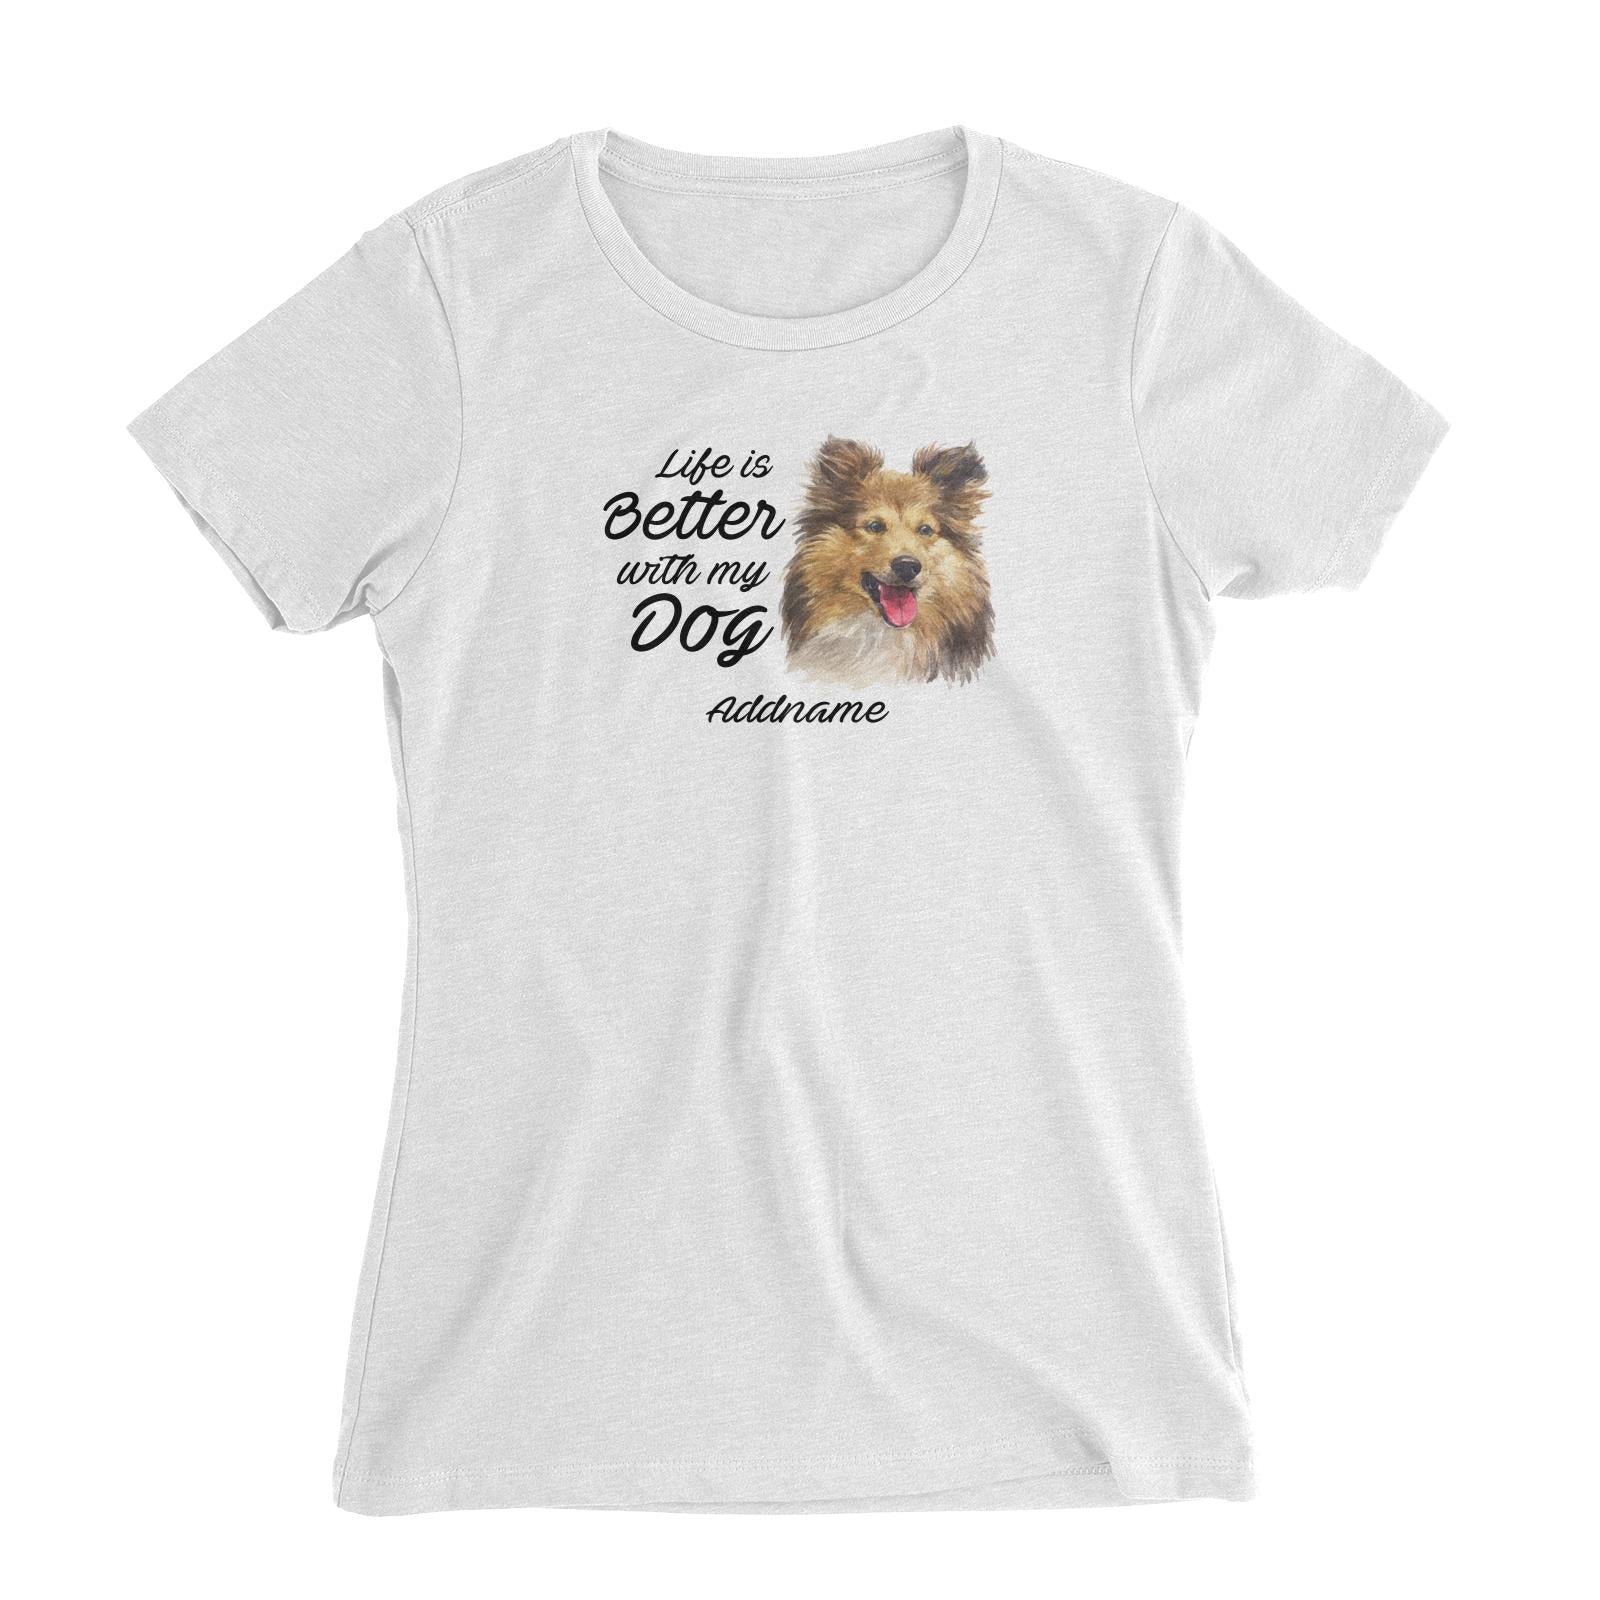 Watercolor Life is Better With My Dog Shetland Sheepdog Addname Women's Slim Fit T-Shirt